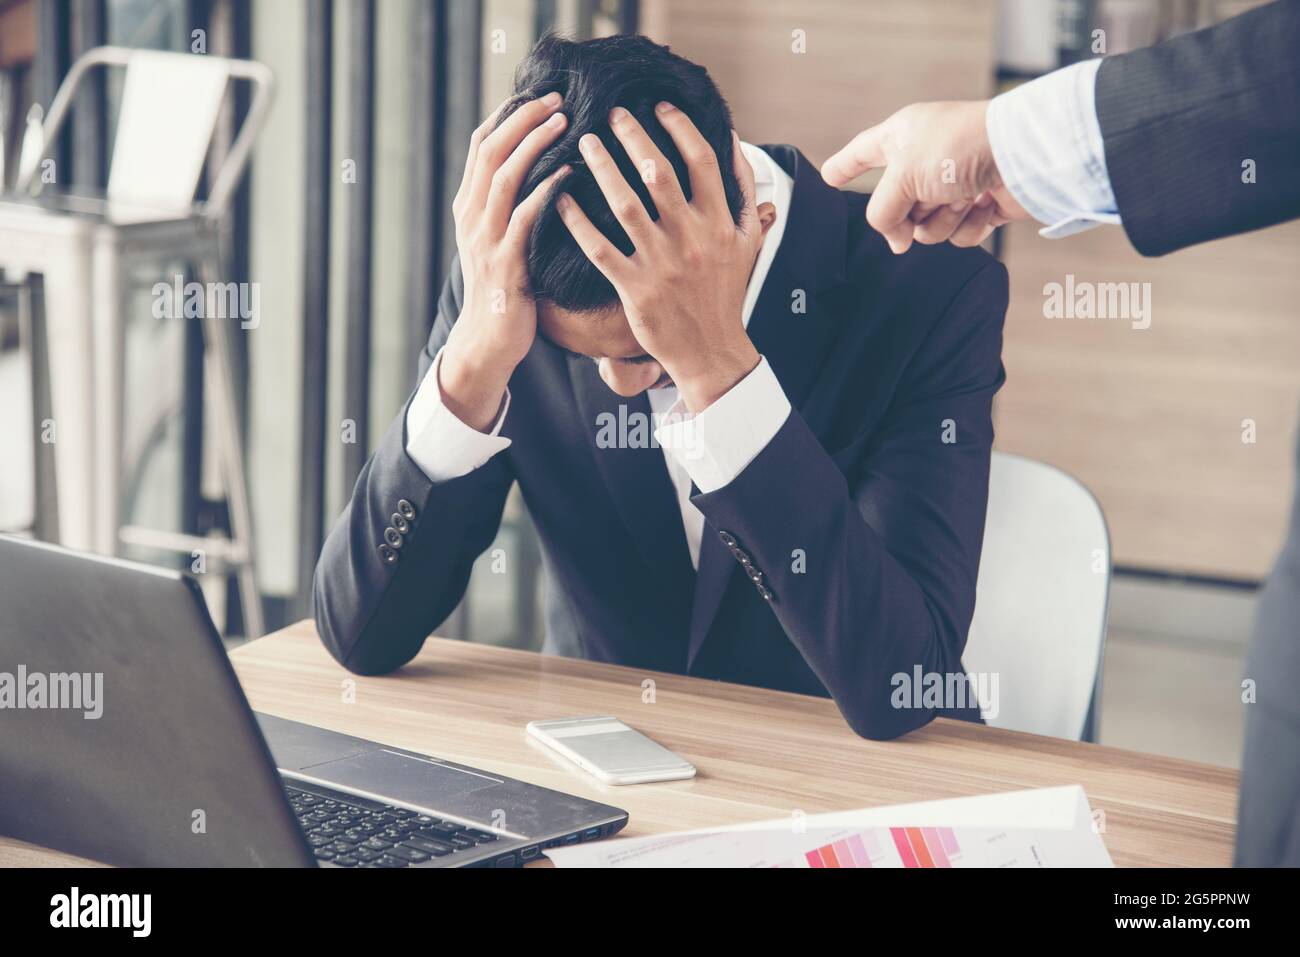 Unemployed Jobless People Crisis who Recession, Stress and lose job. Despair office People feel Stressful in depress situation. Middle aged people des Stock Photo